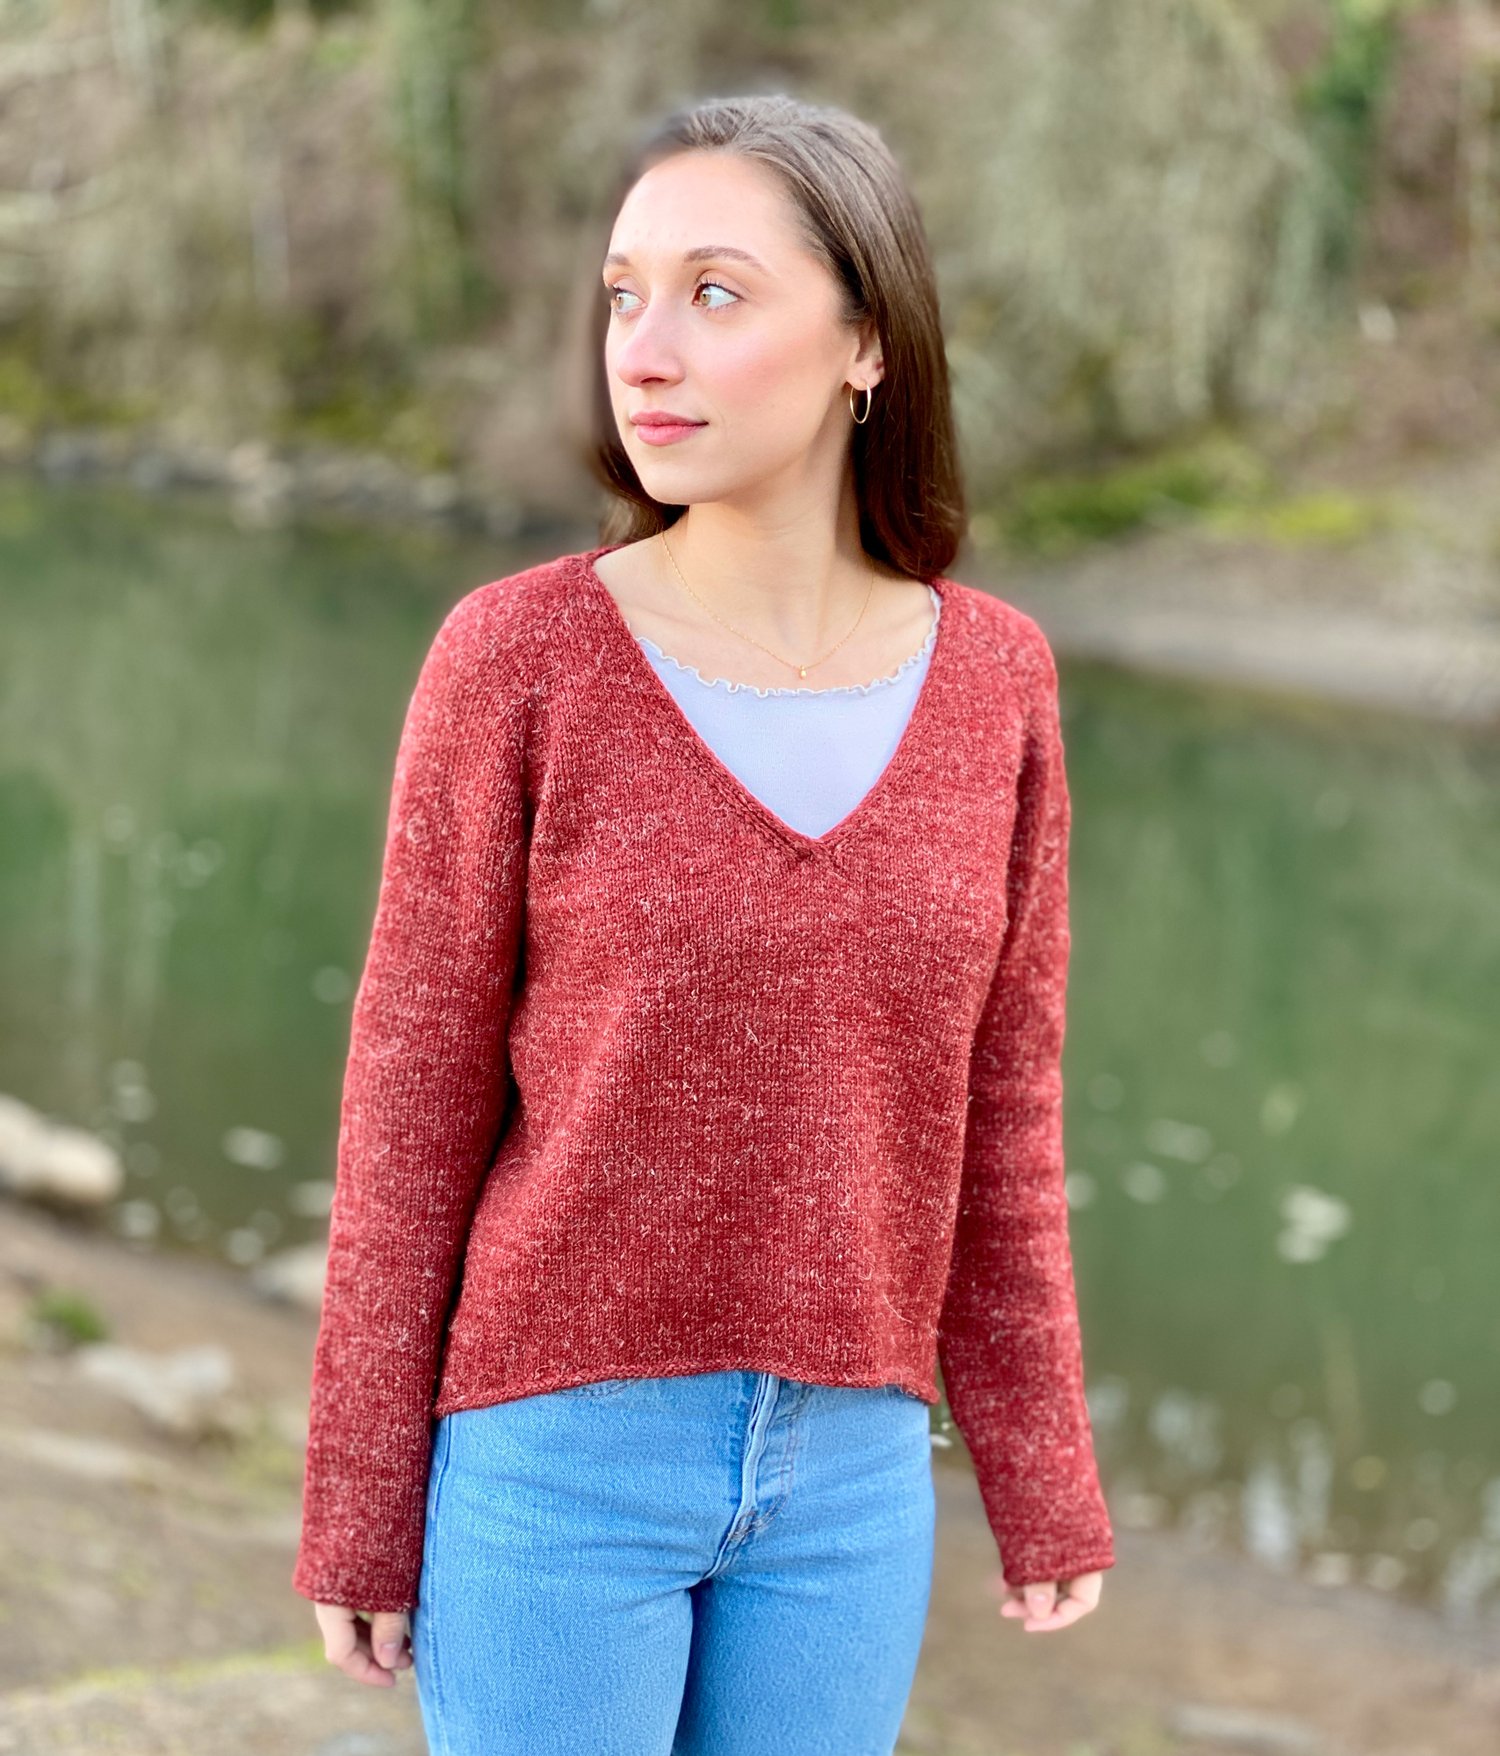 lommelygter spænding Hændelse, begivenhed Classic Tee Pullover Sweater Knitting Pattern — Knit for the Soul by Kay  Hopkins